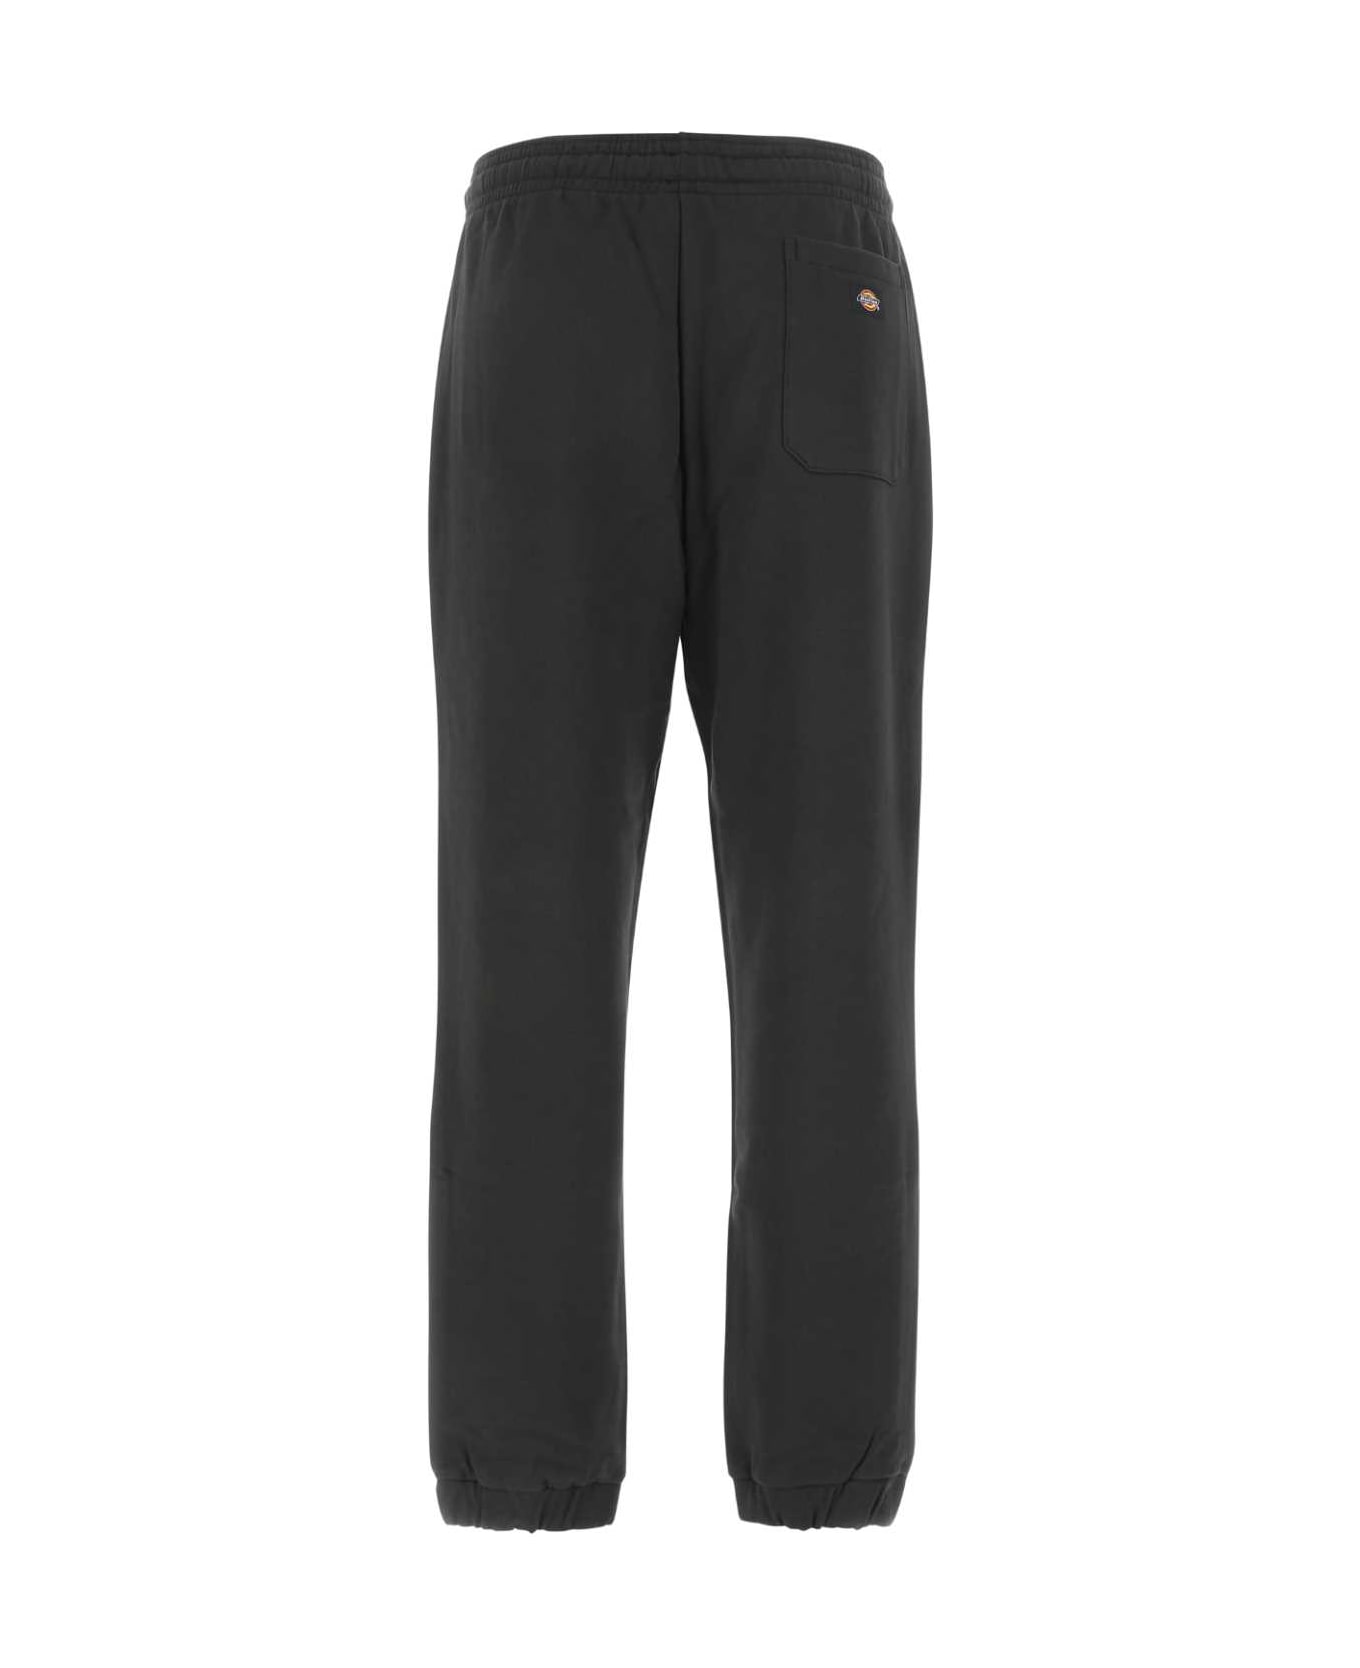 Dickies Black Cotton Blend Bienville Joggers - BLK1 ボトムス